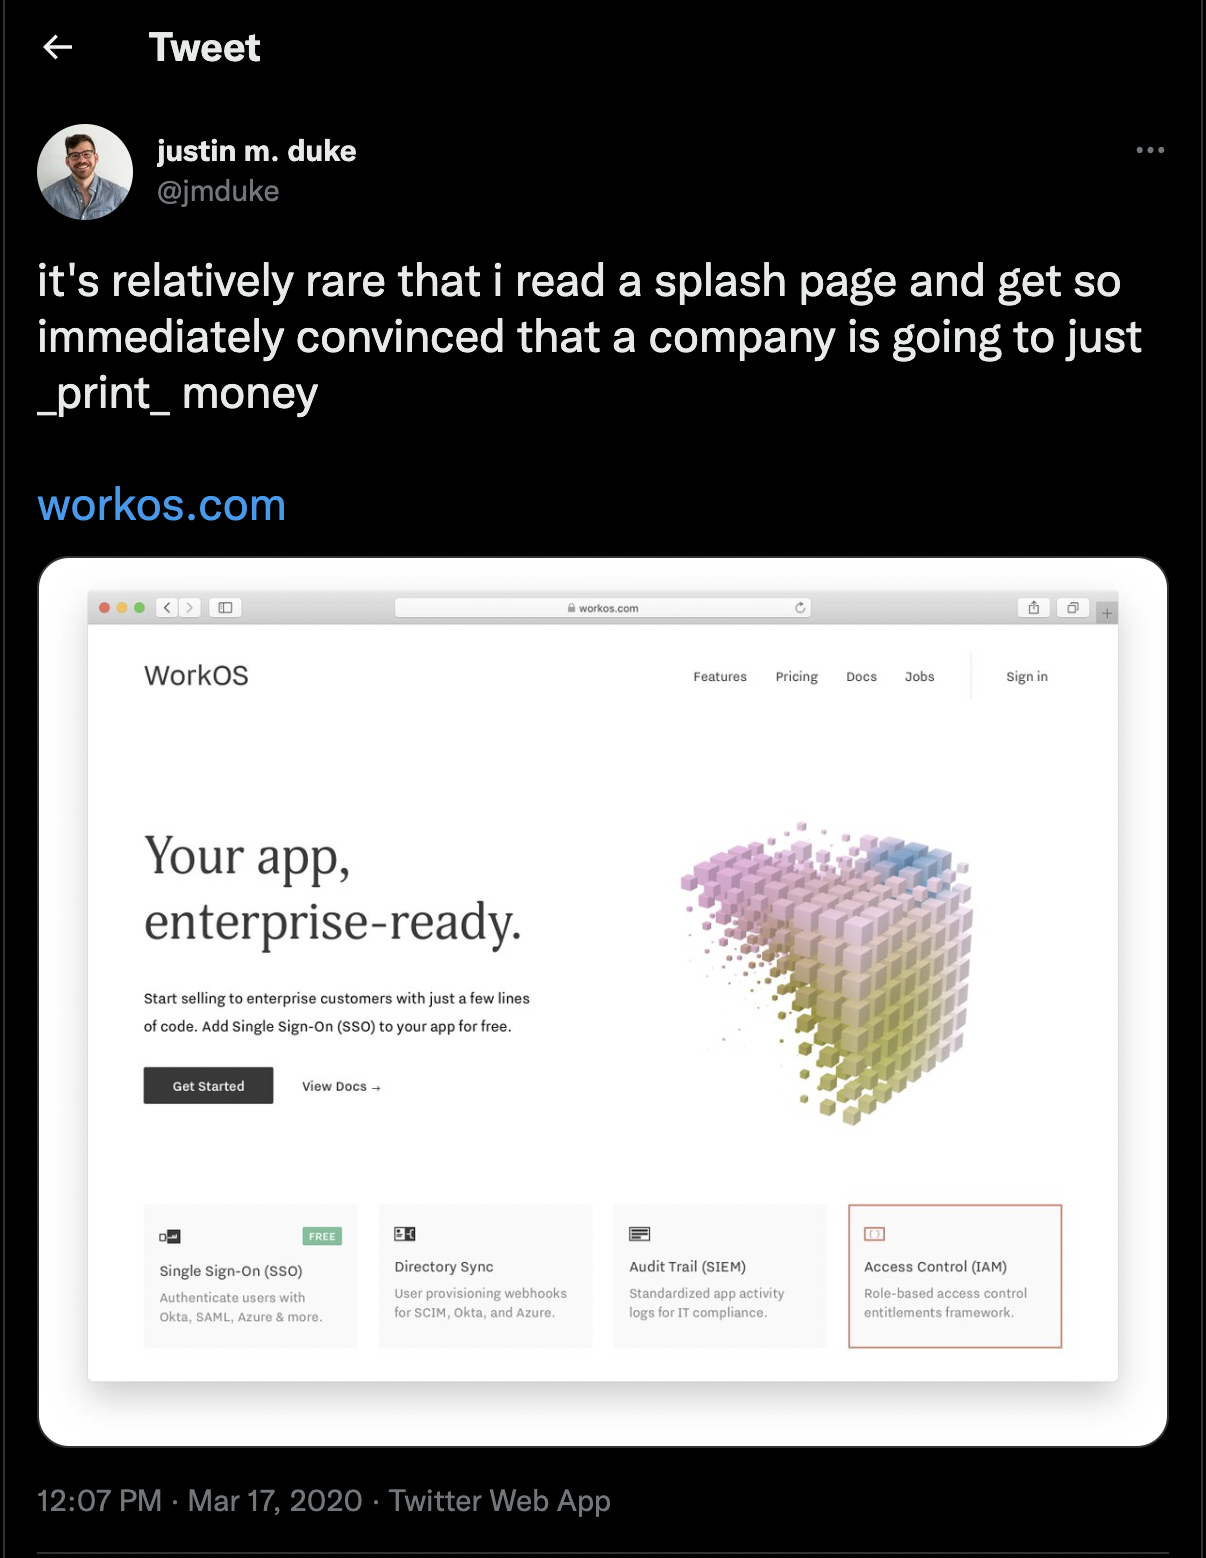 @jmduke: "it's relatively rare that i read a splash page and get so immediately convinced that a company is going to just print money" workos.com